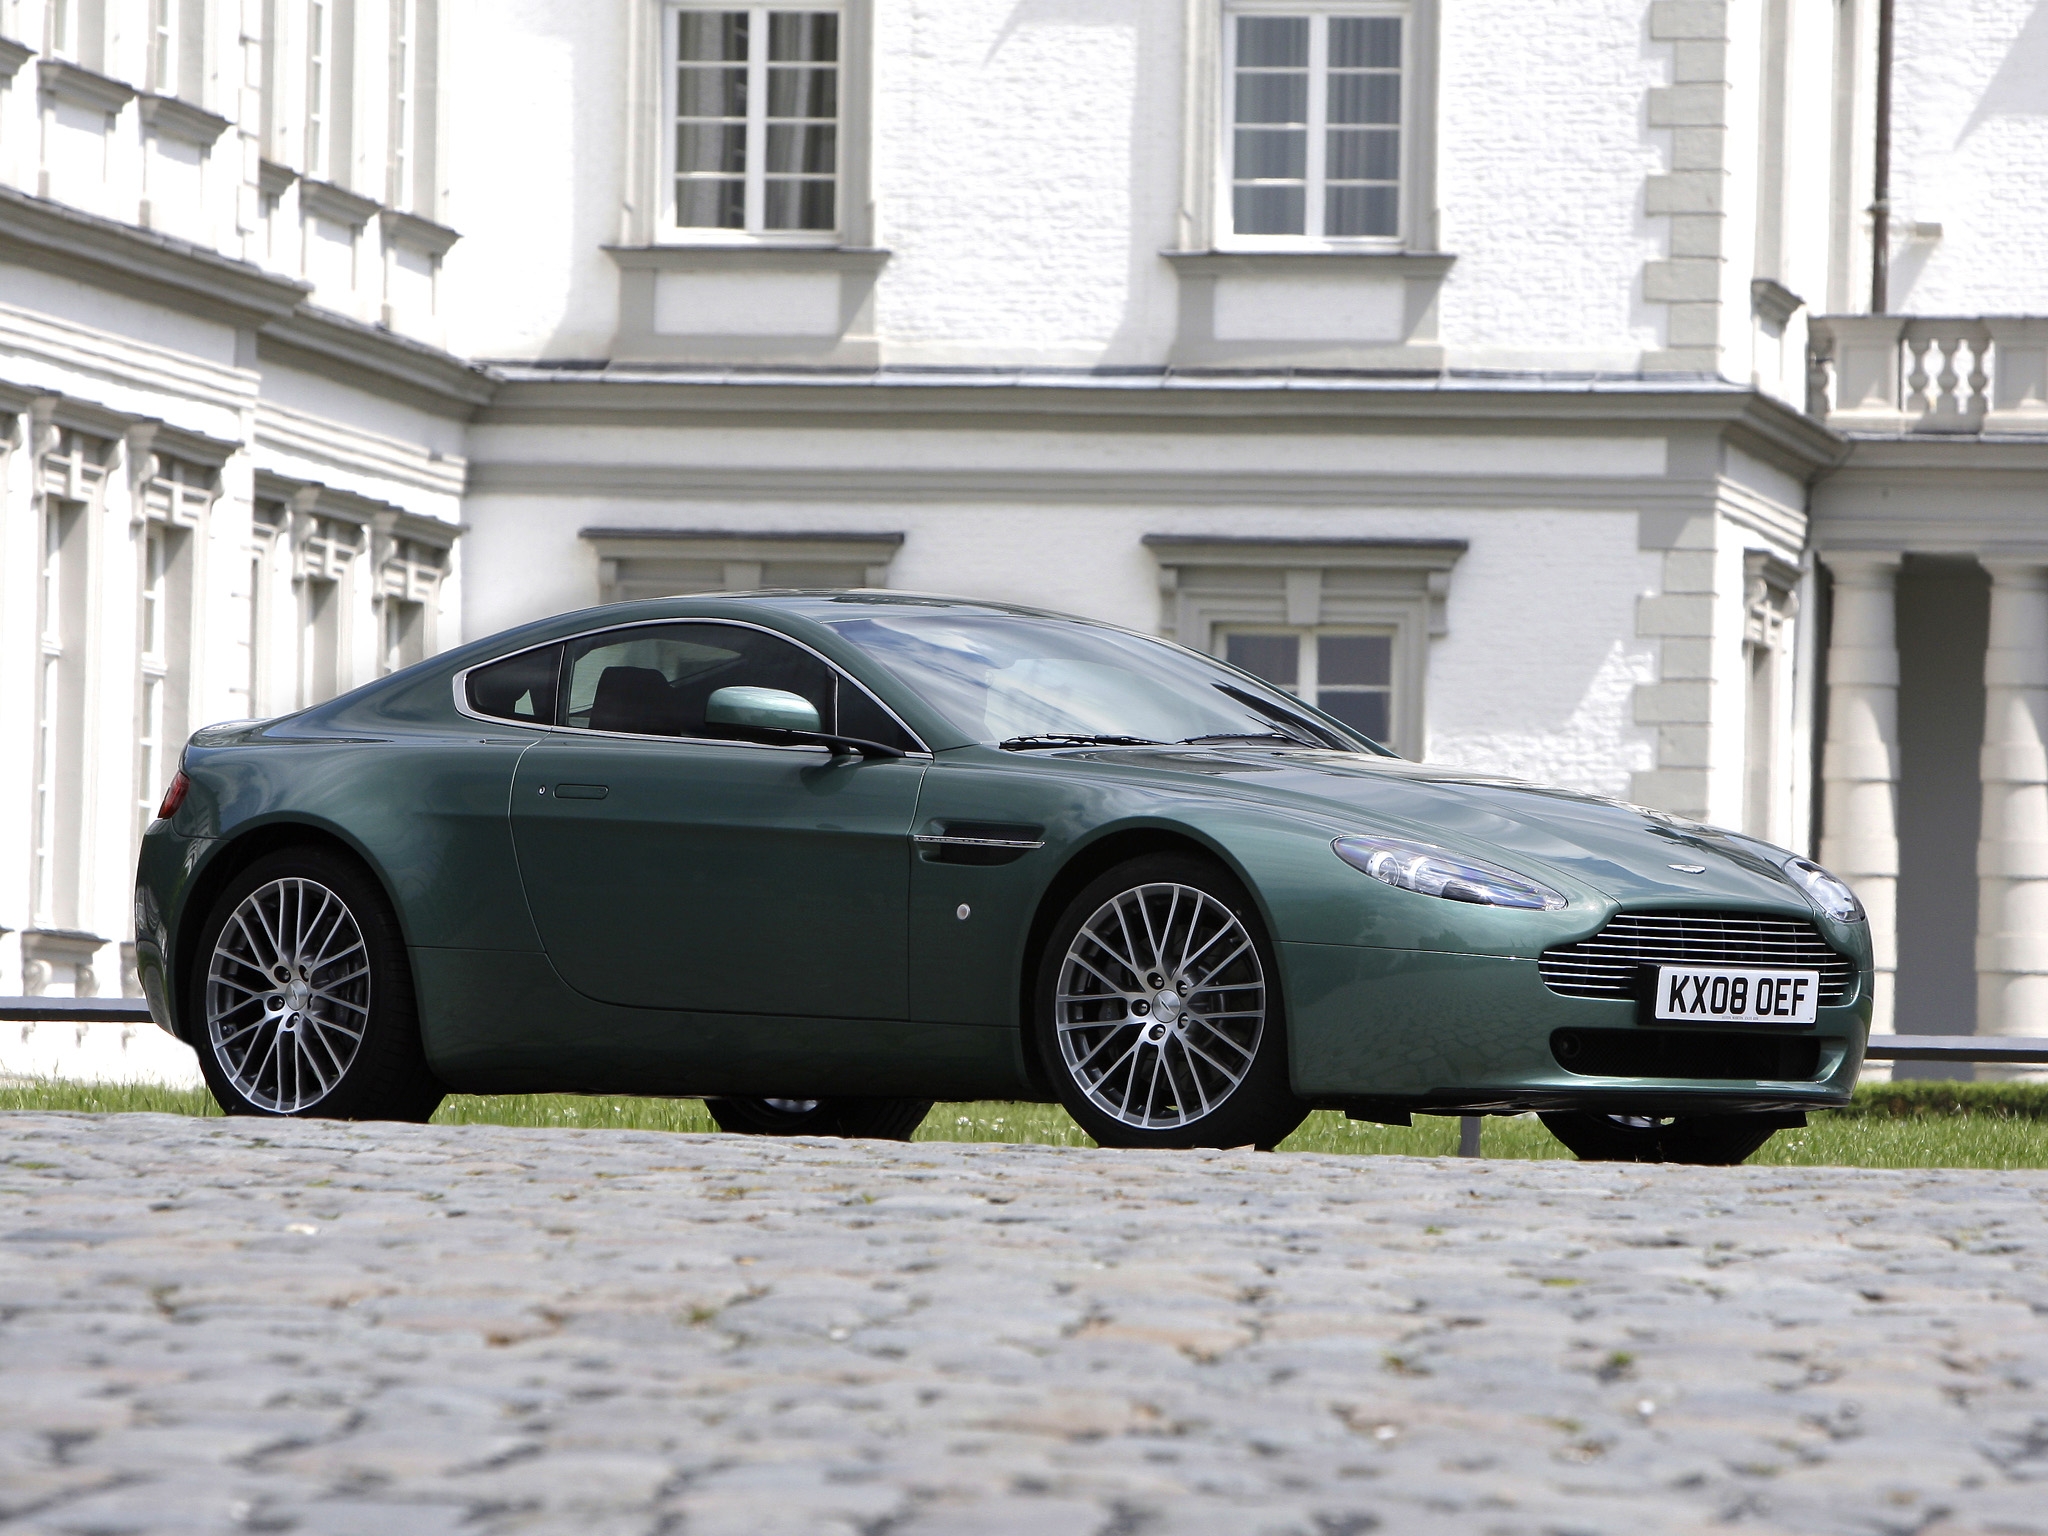 cars, aston martin, green, building, side view, style, 2008, v8, vantage